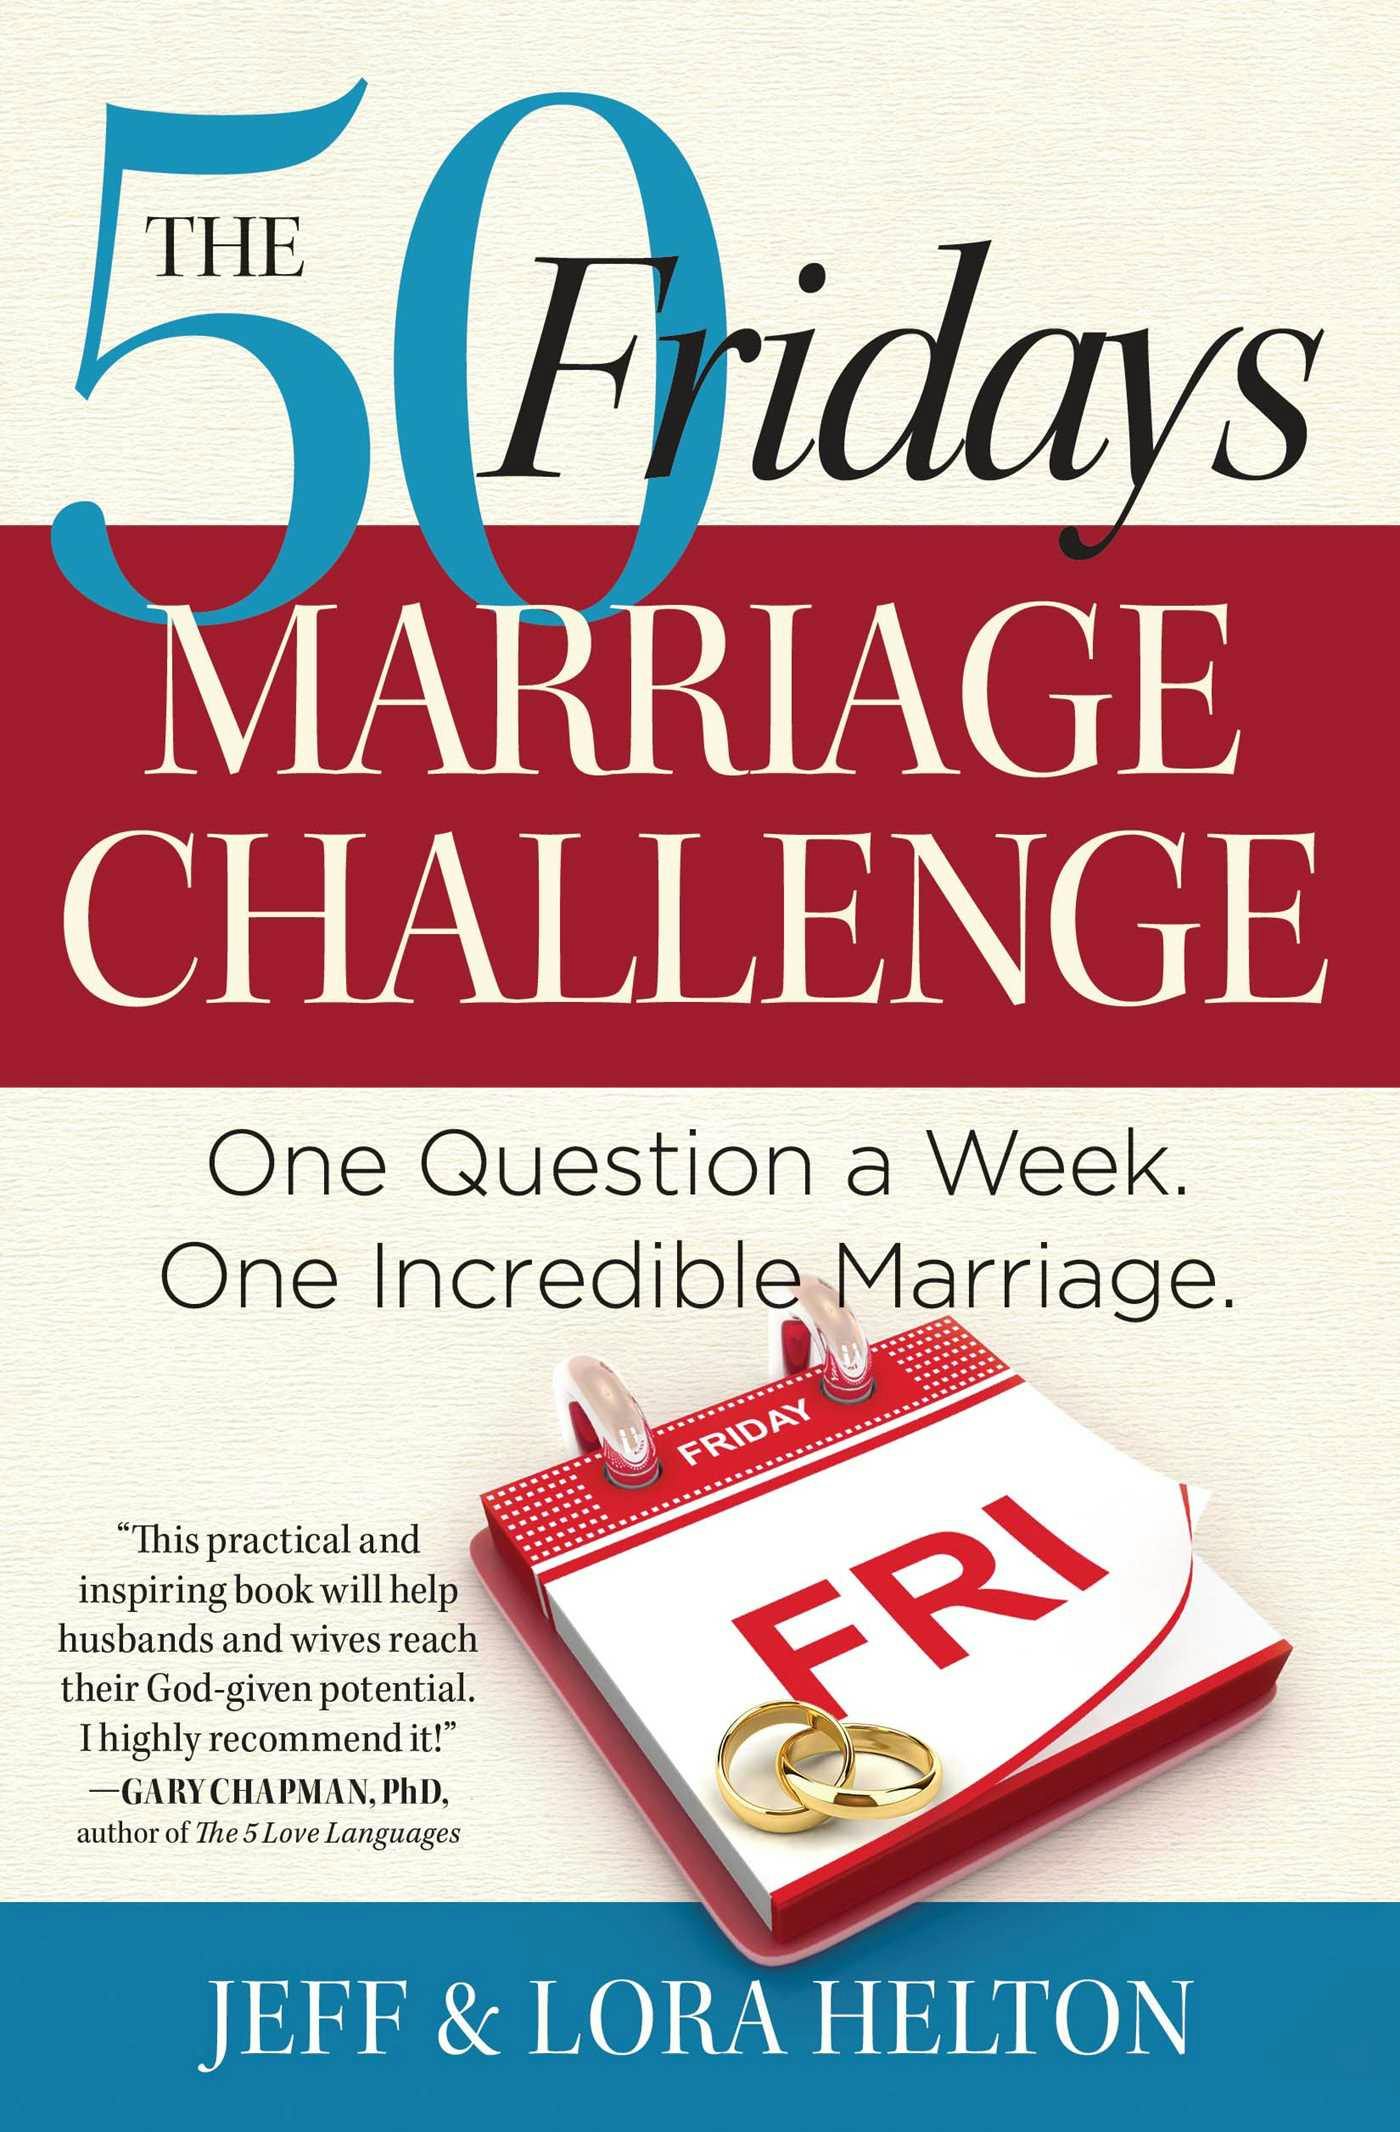 The 50 Fridays Marriage Challenge: One Question a Week. One Incredible Marriage. - Helton Lora, Jeff Helton